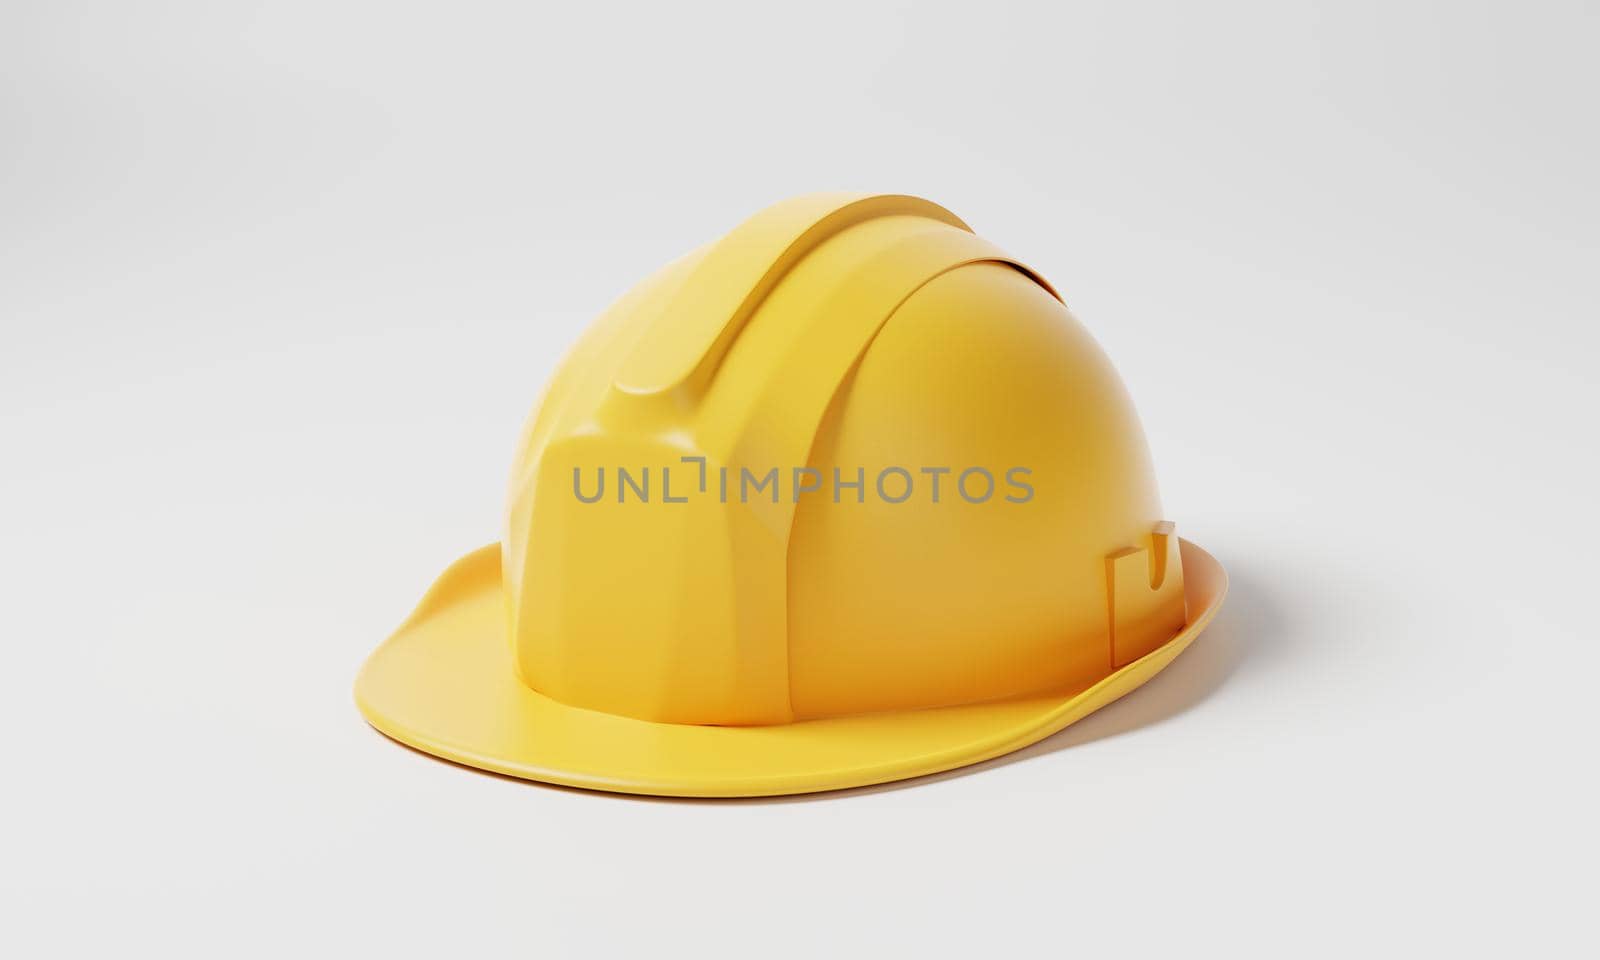 Yellow hard hat safety helmet on white background. Business and construction engineering concept. 3D illustration rendering